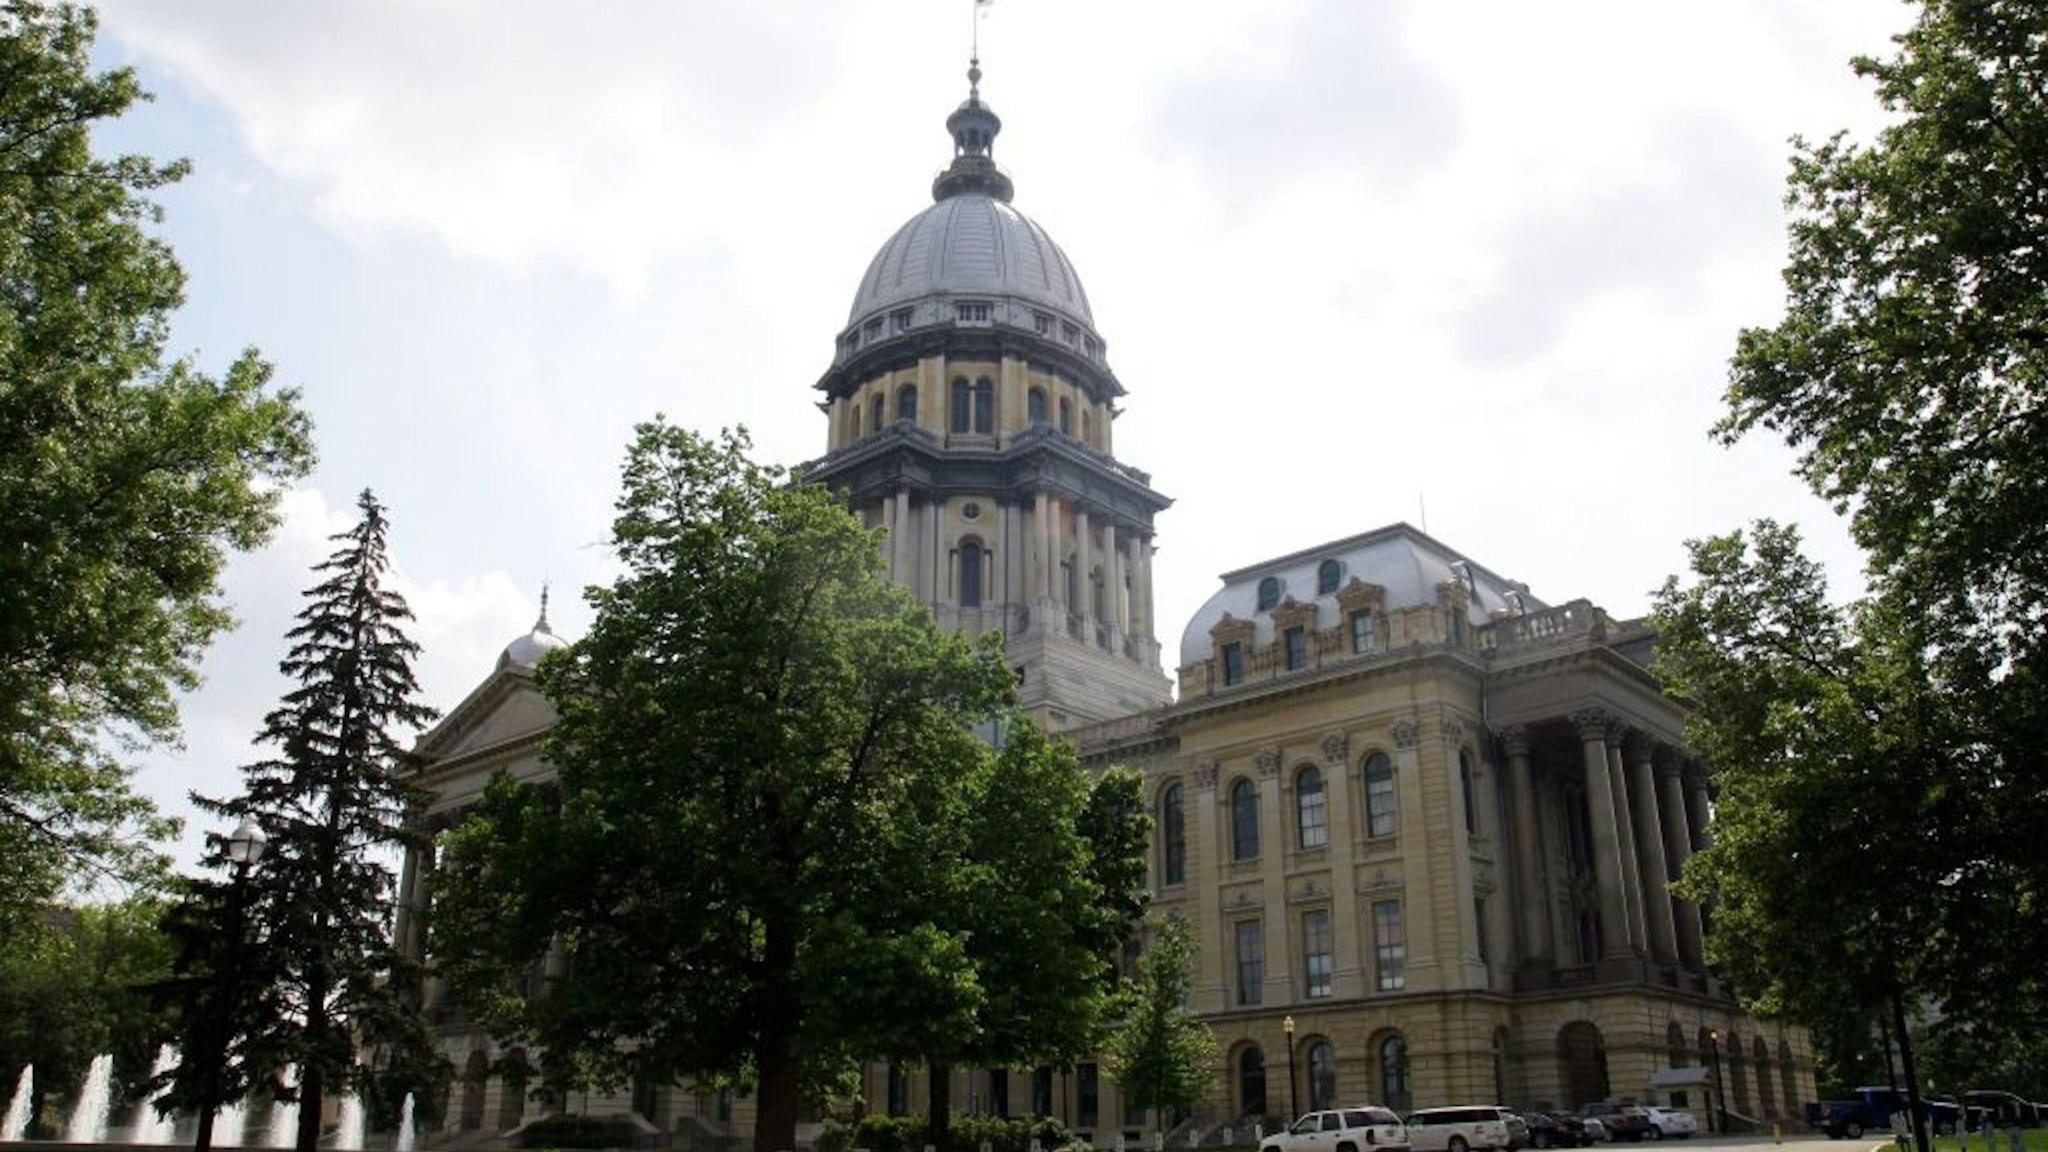 SPRINGFIELD, IL - MAY 05: The Illinois State Capitol Building, in Springfield, Illinois on MAY 05, 2012.